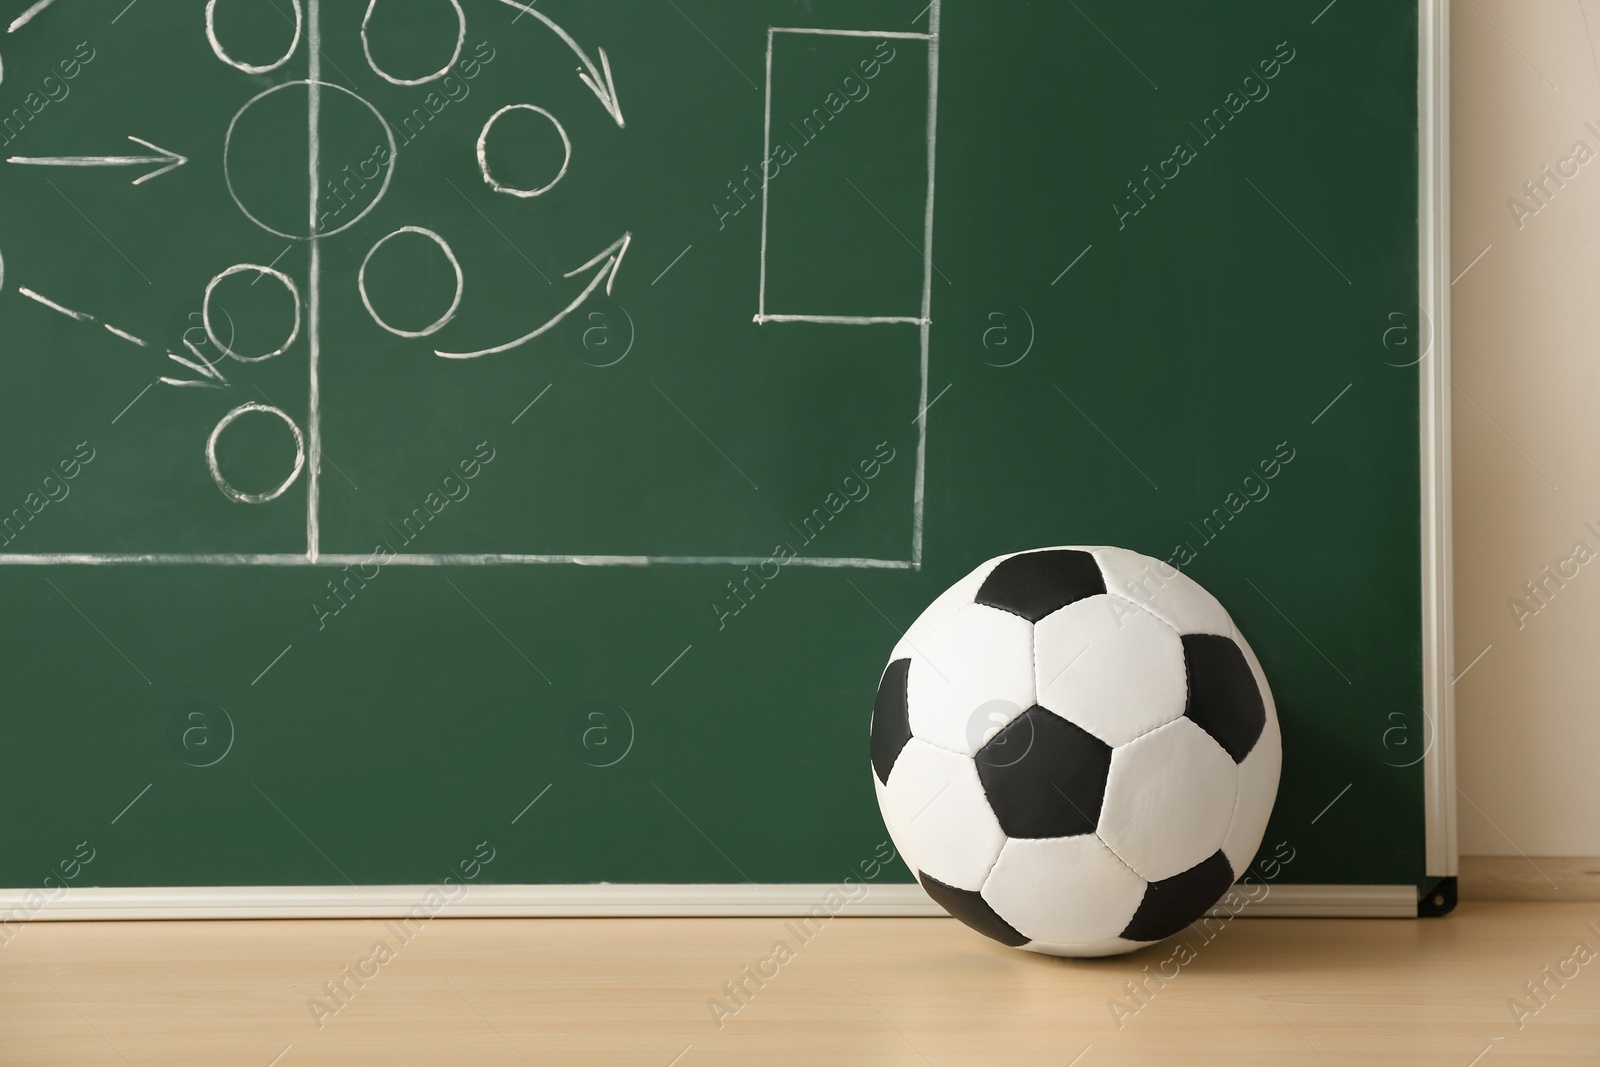 Photo of Soccer ball near chalkboard with football game scheme on table